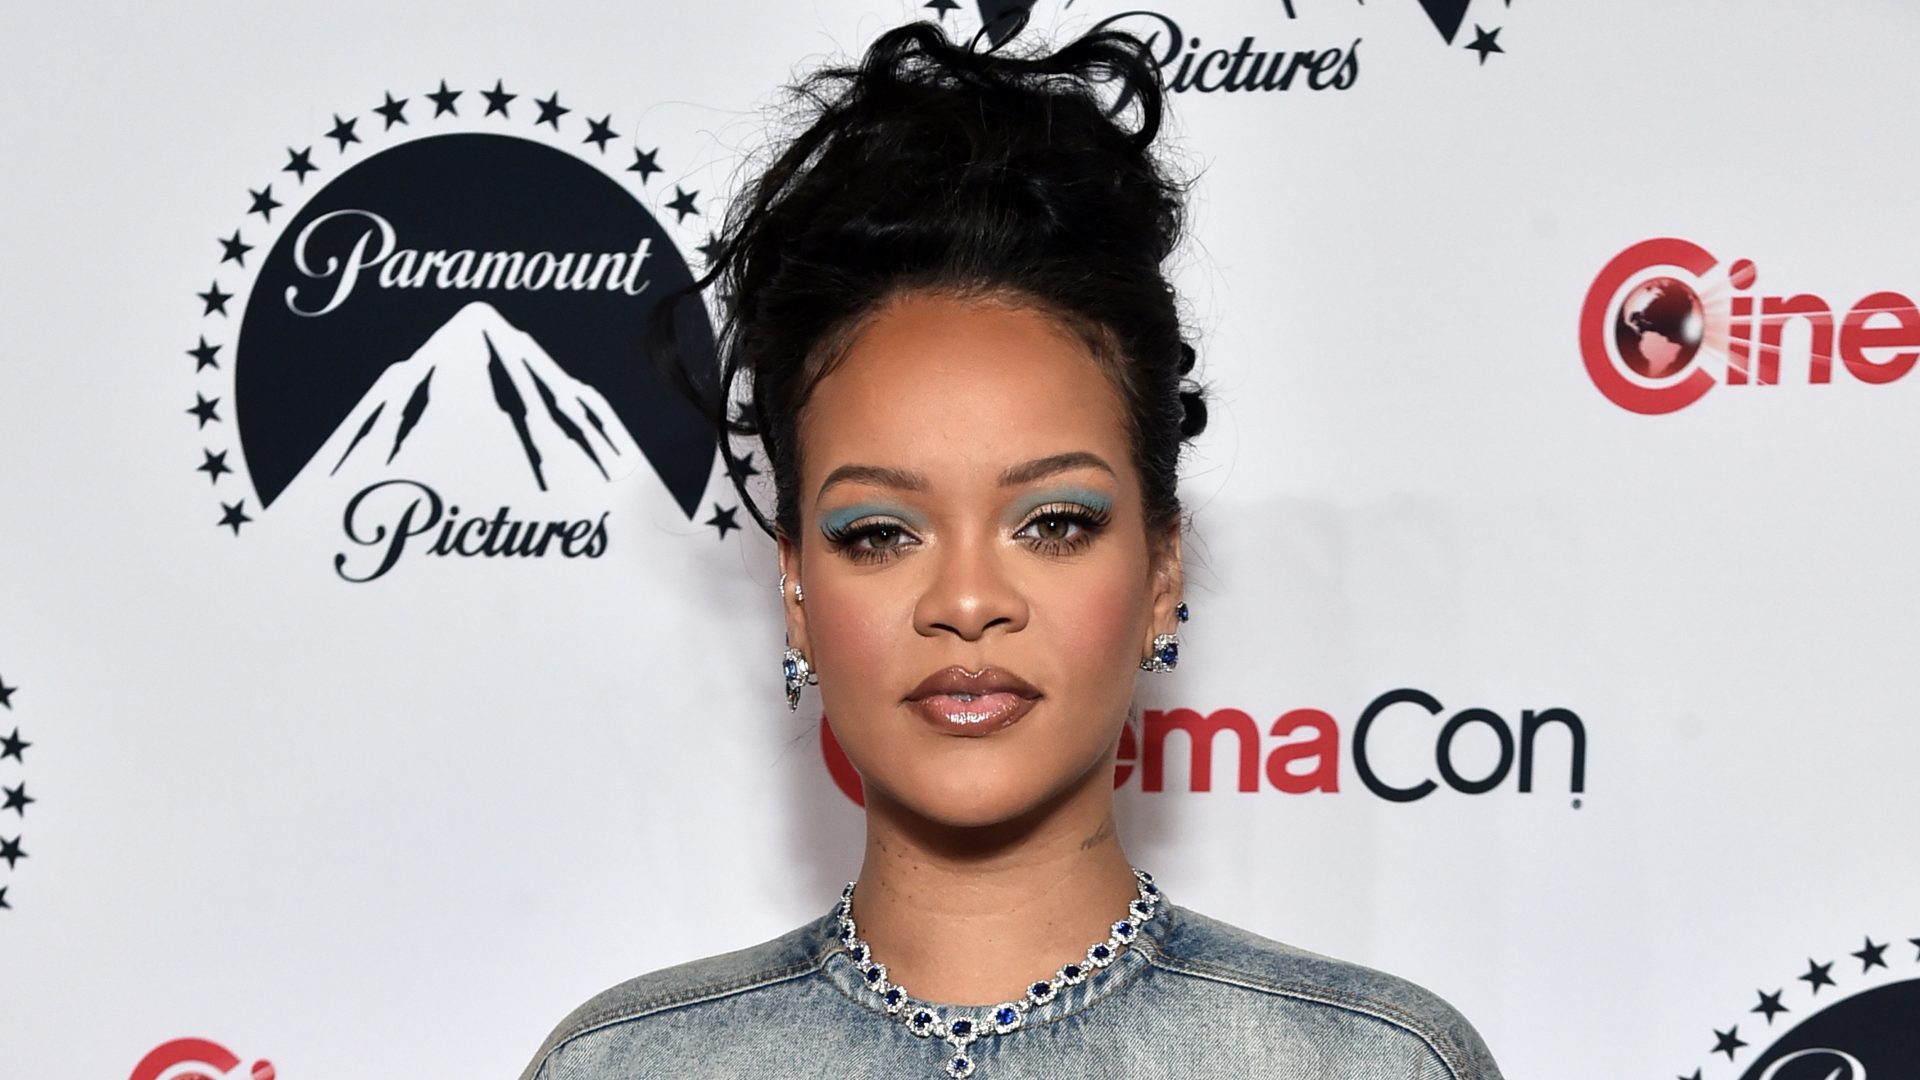 LAS VEGAS, NEVADA - APRIL 27: Rihanna poses for photos, promoting the upcoming film "The Smurfs Movie", at the Paramount Pictures presentation during CinemaCon 2023, the official convention of the National Association of Theatre Owners, at Caesars Palace on April 27, 2023 in Las Vegas, Nevada.